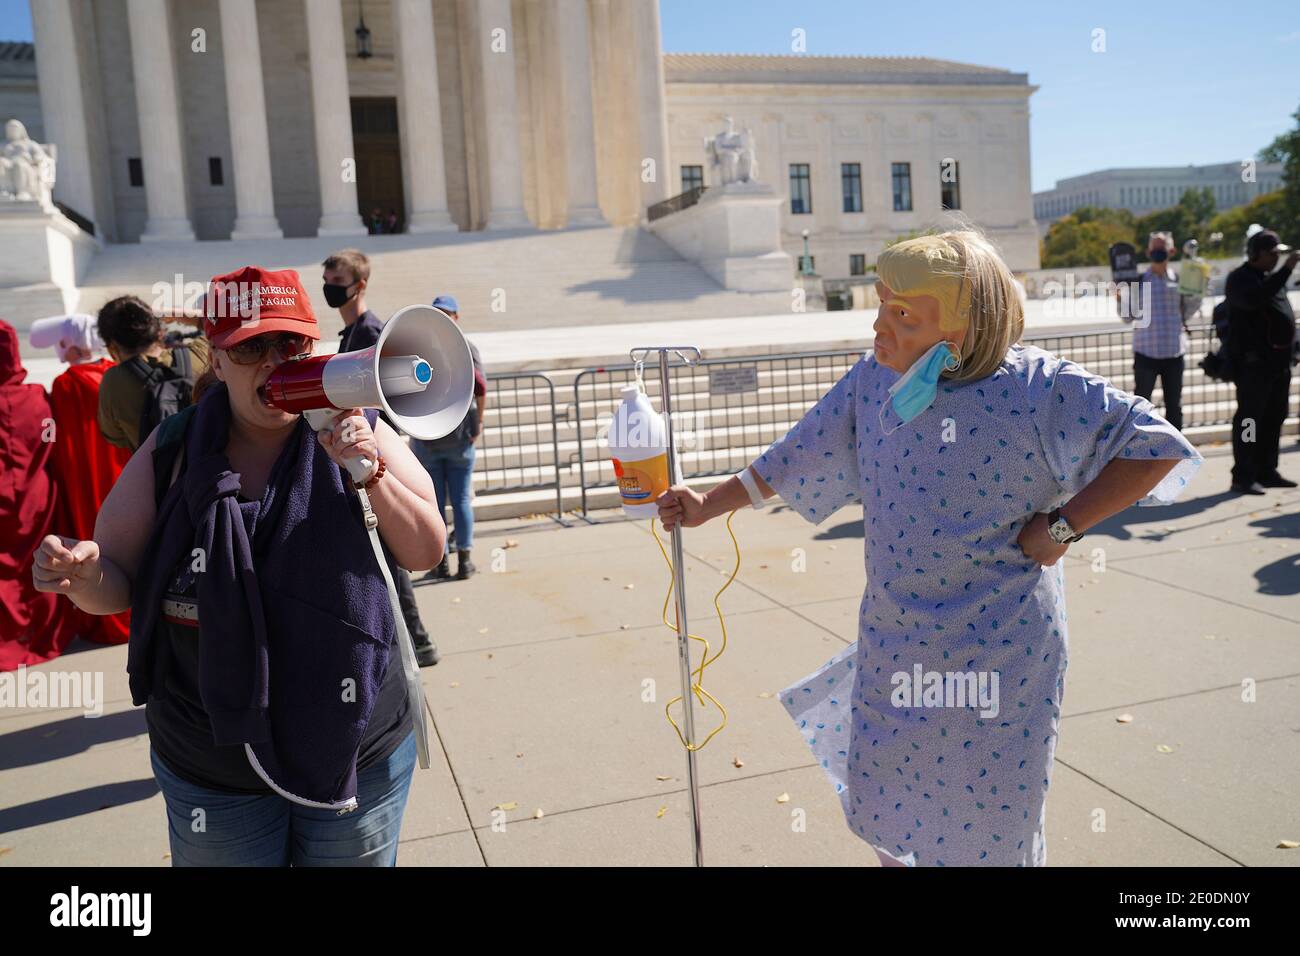 Washington, DC – October 13, 2020: Demonstrators for and against the confirmation of Trump nominee Amy Coney Barrett to the Supreme Court. Stock Photo